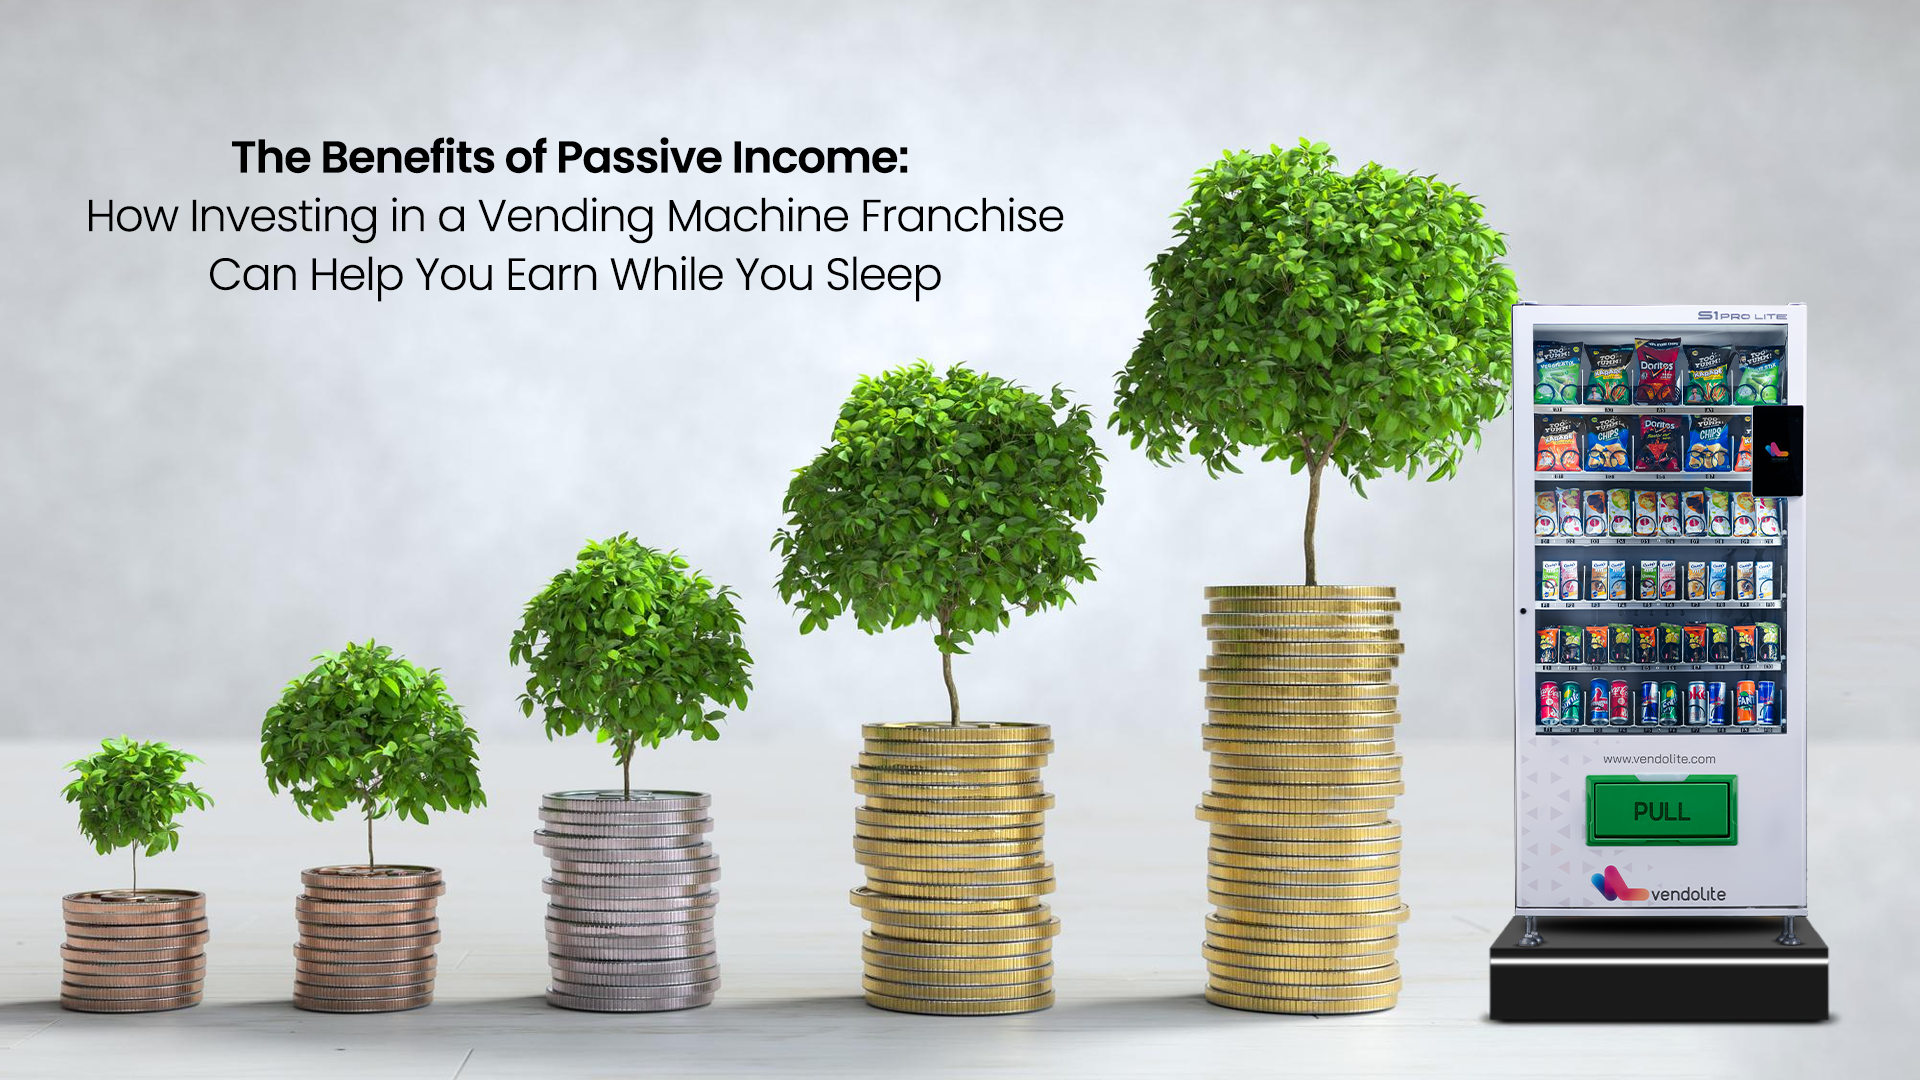 The Benefits of Passive Income: How Investing in a Vending Machine Franchise Can Help You Earn While You Sleep